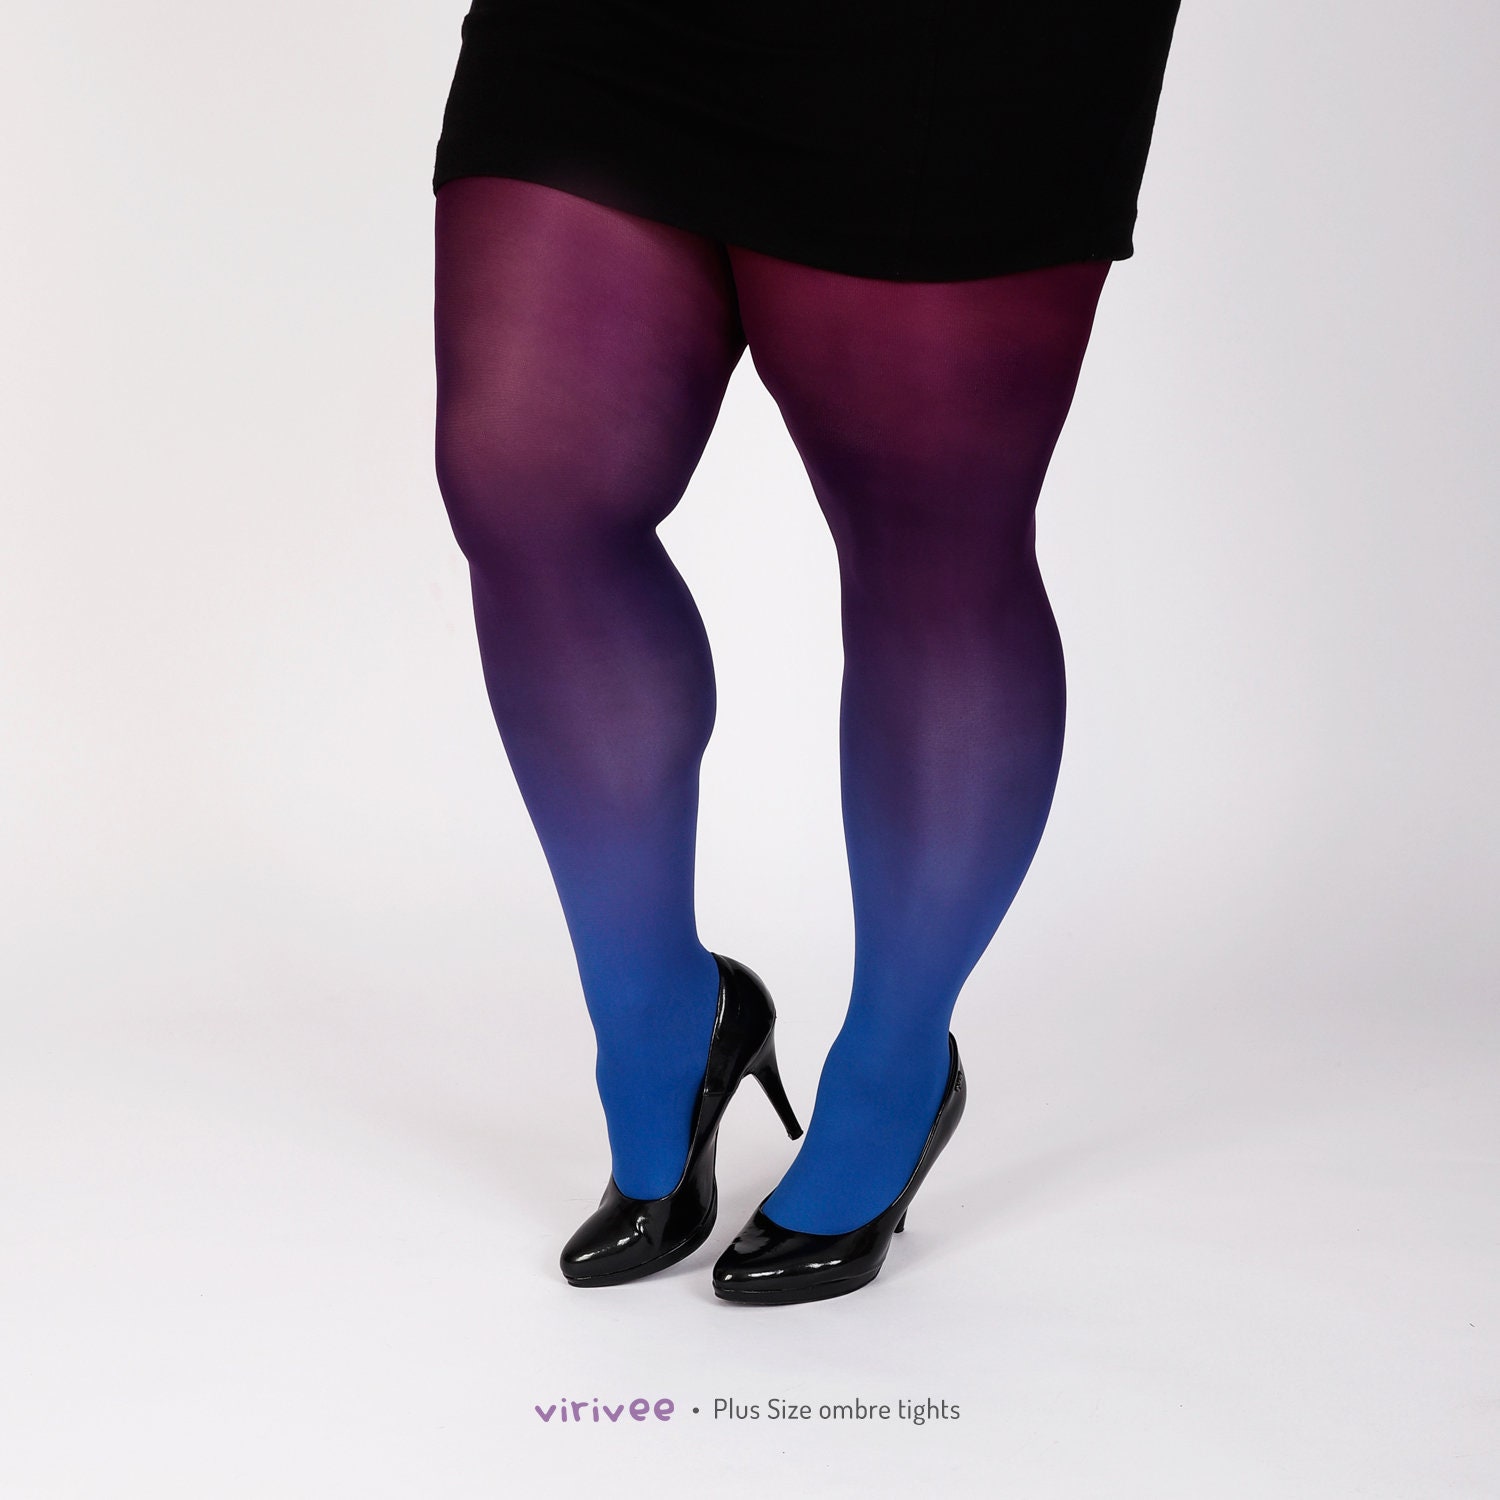 Milan tights, white-blue - Virivee Tights - Unique tights designed and made  in Europe